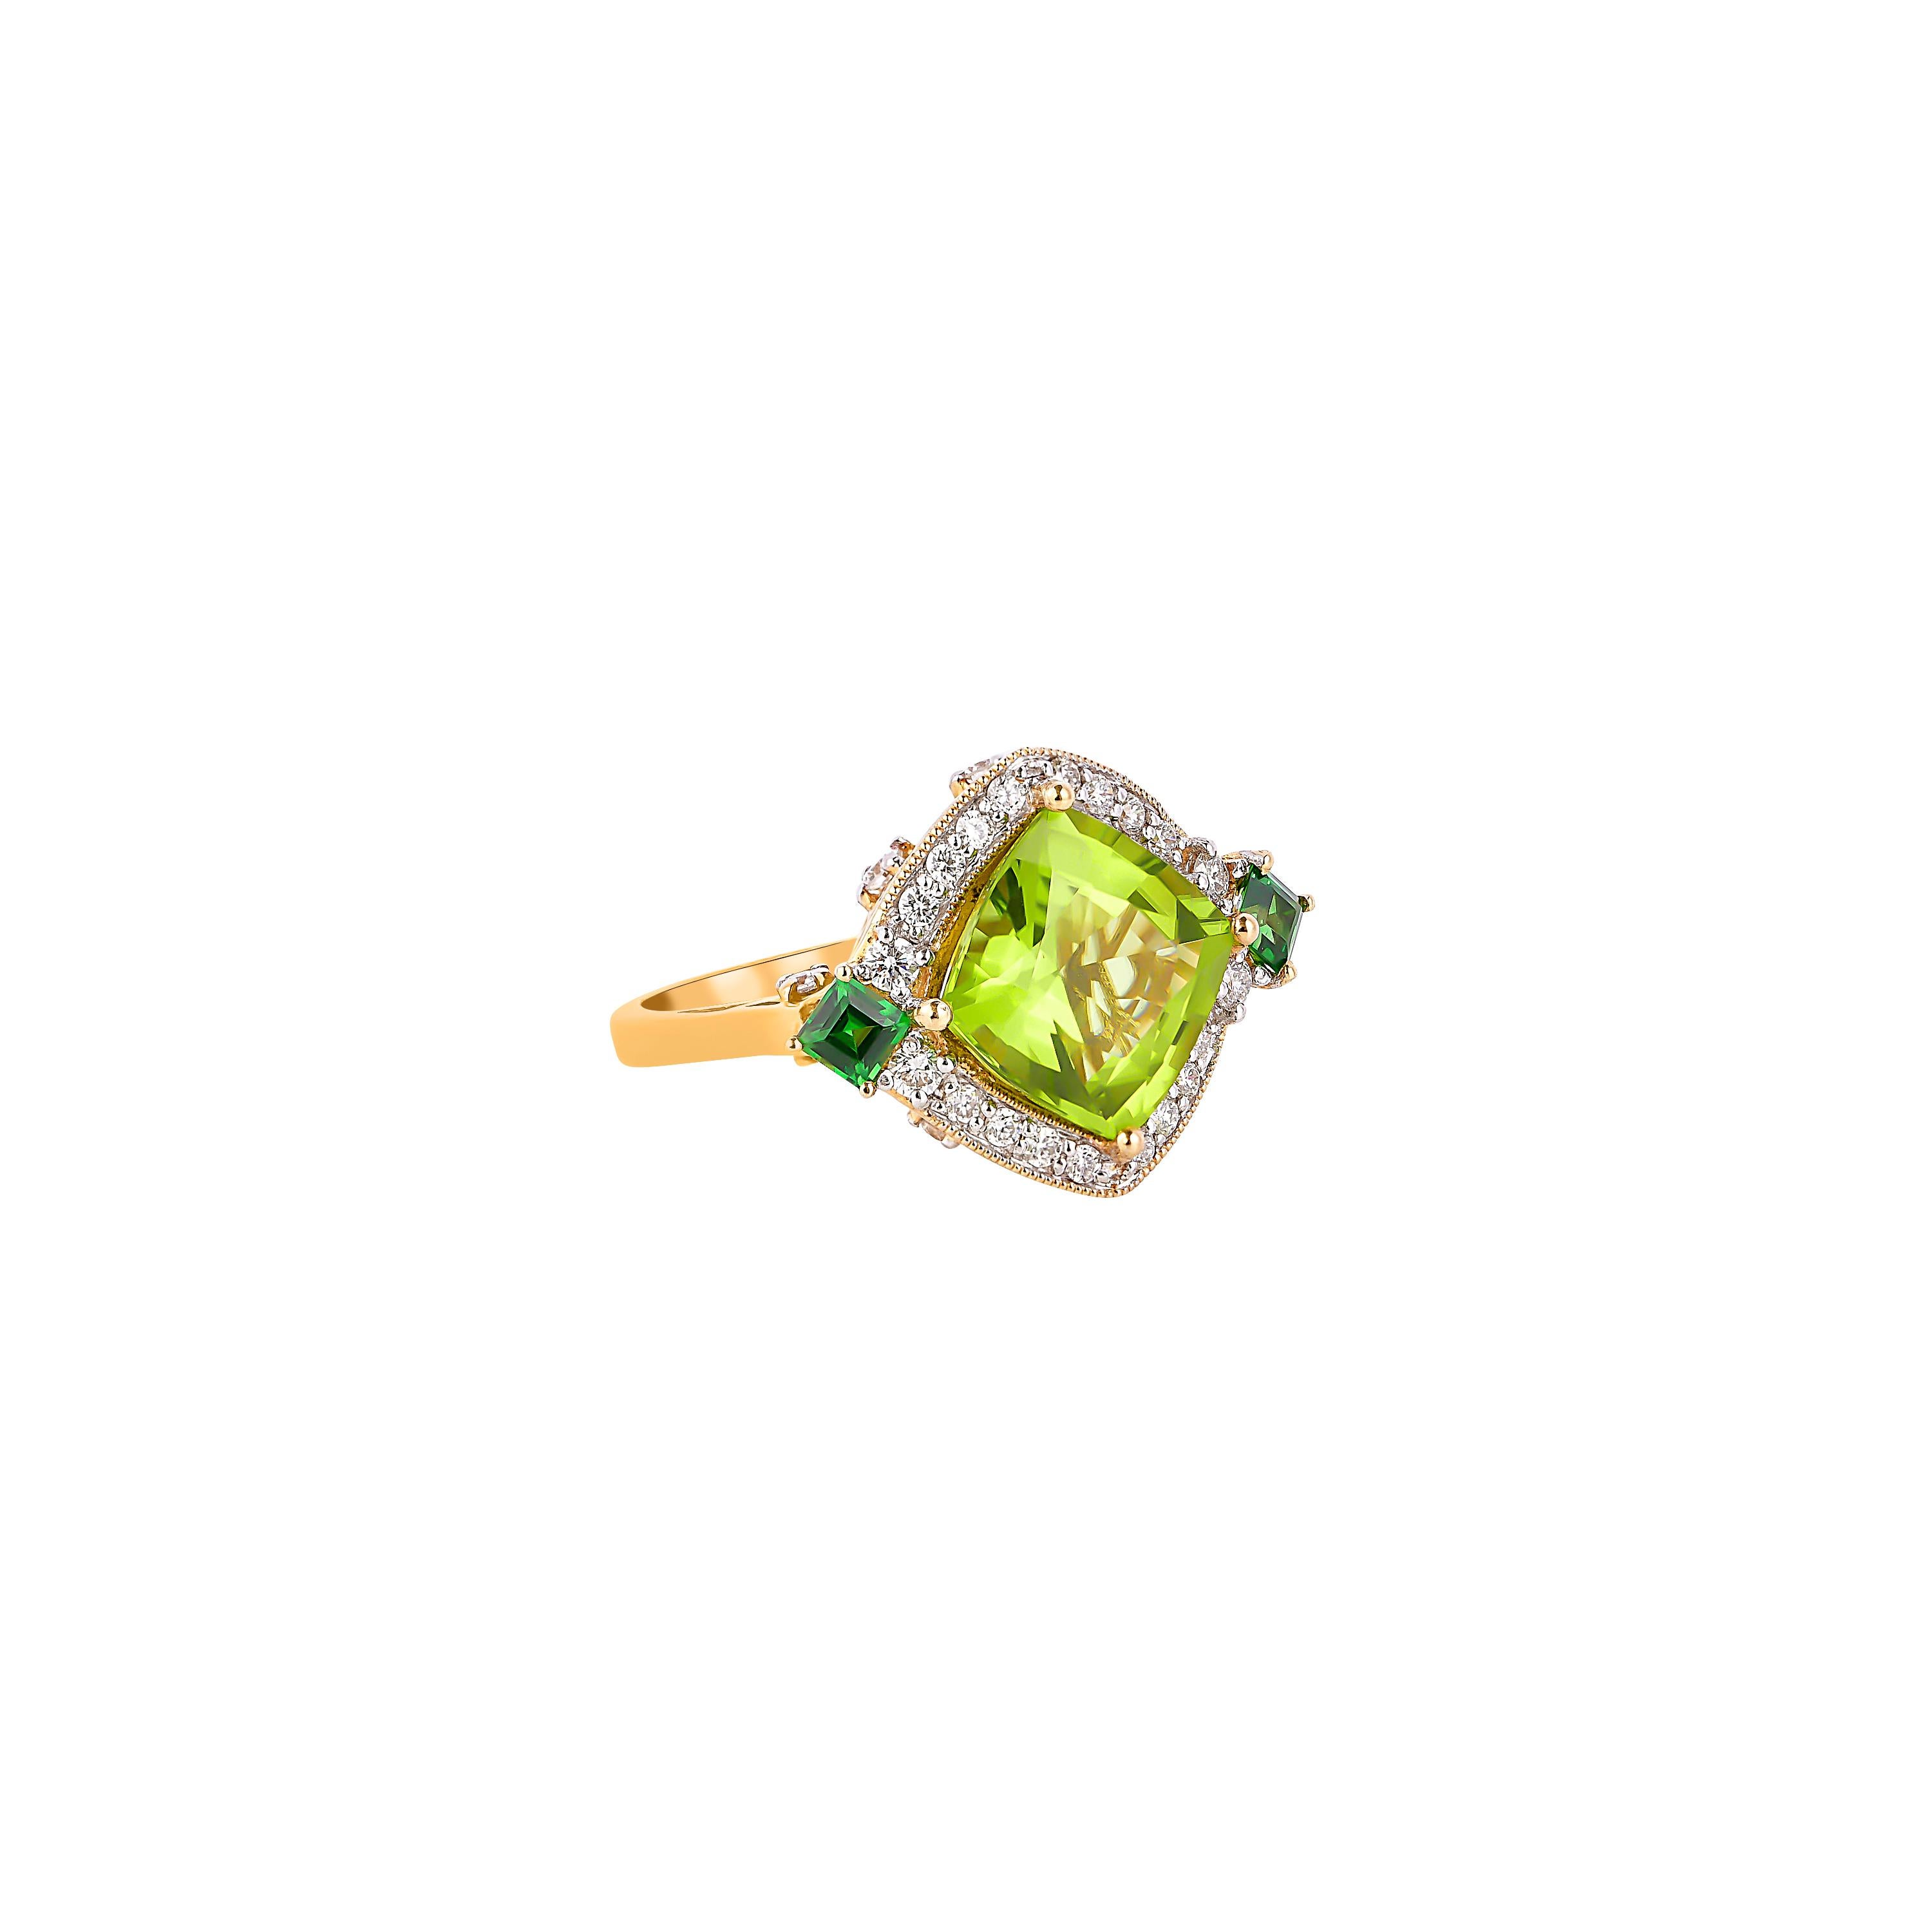 This collection features an array of pretty peridot rings! Accented with diamonds these rings are made in yellow gold and present a vibrant and fresh look. 

Classic peridot ring in 18K yellow gold with diamonds. 

Peridot: 4.75 carat cushion